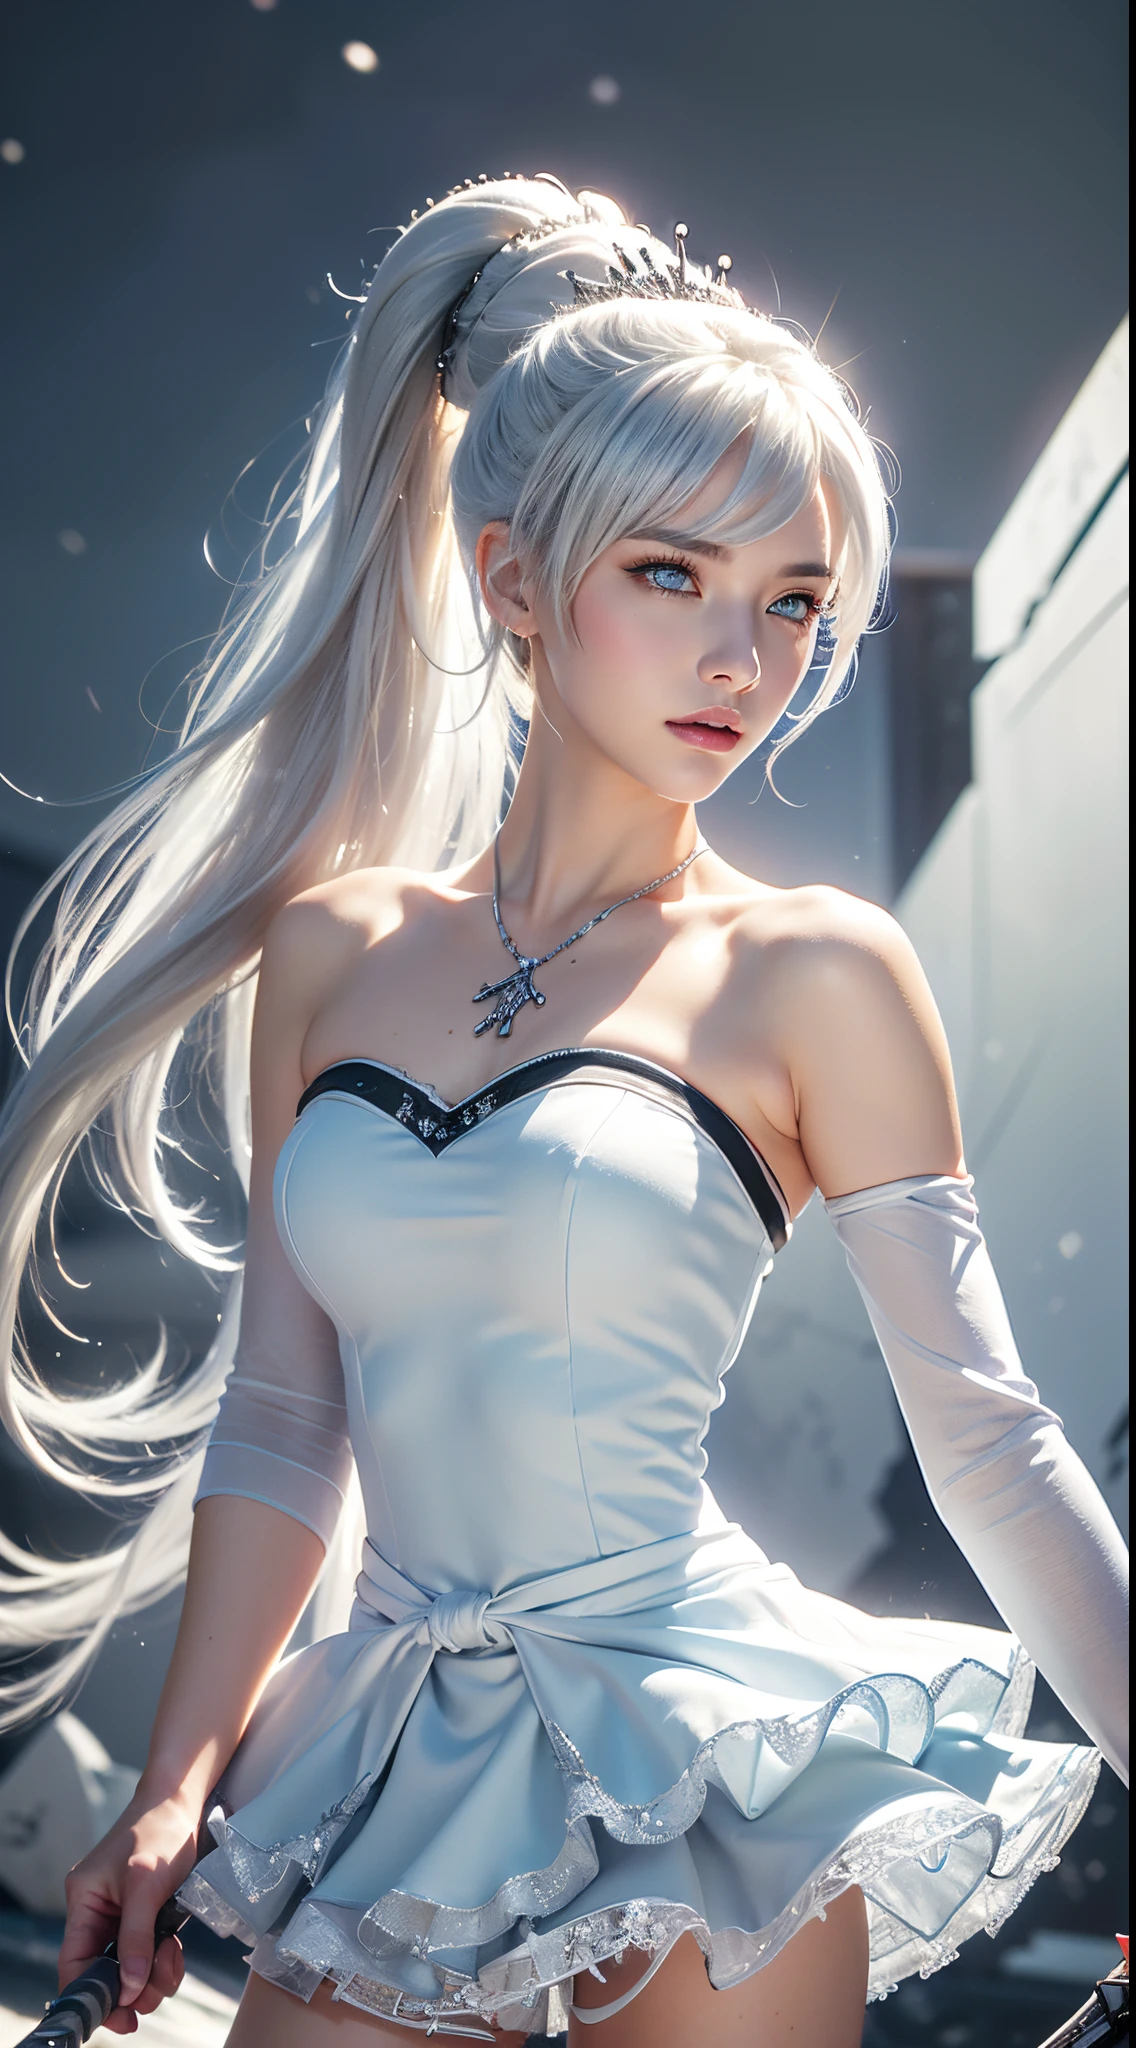 weiss schnee (\rwby\), silver hair, 1 girl, best quality, high-detailed, masterpiece, high definition, Sharp: 1.2, Perfect body beauty: 1.4, Slim abs: 1.2, ((Layered Hair Style,)), Highly detailed face and skin texture, Detailed eyes, Double eyelids, Looking at the camera, pale blue eyes, long hair, off-center ponytail, ice background, perfect lighting,(bright), hyperrealism, rwby, rapier in hand, silver icicle-shaped tiara, thigh-length strapless white-blue dress, pale skin